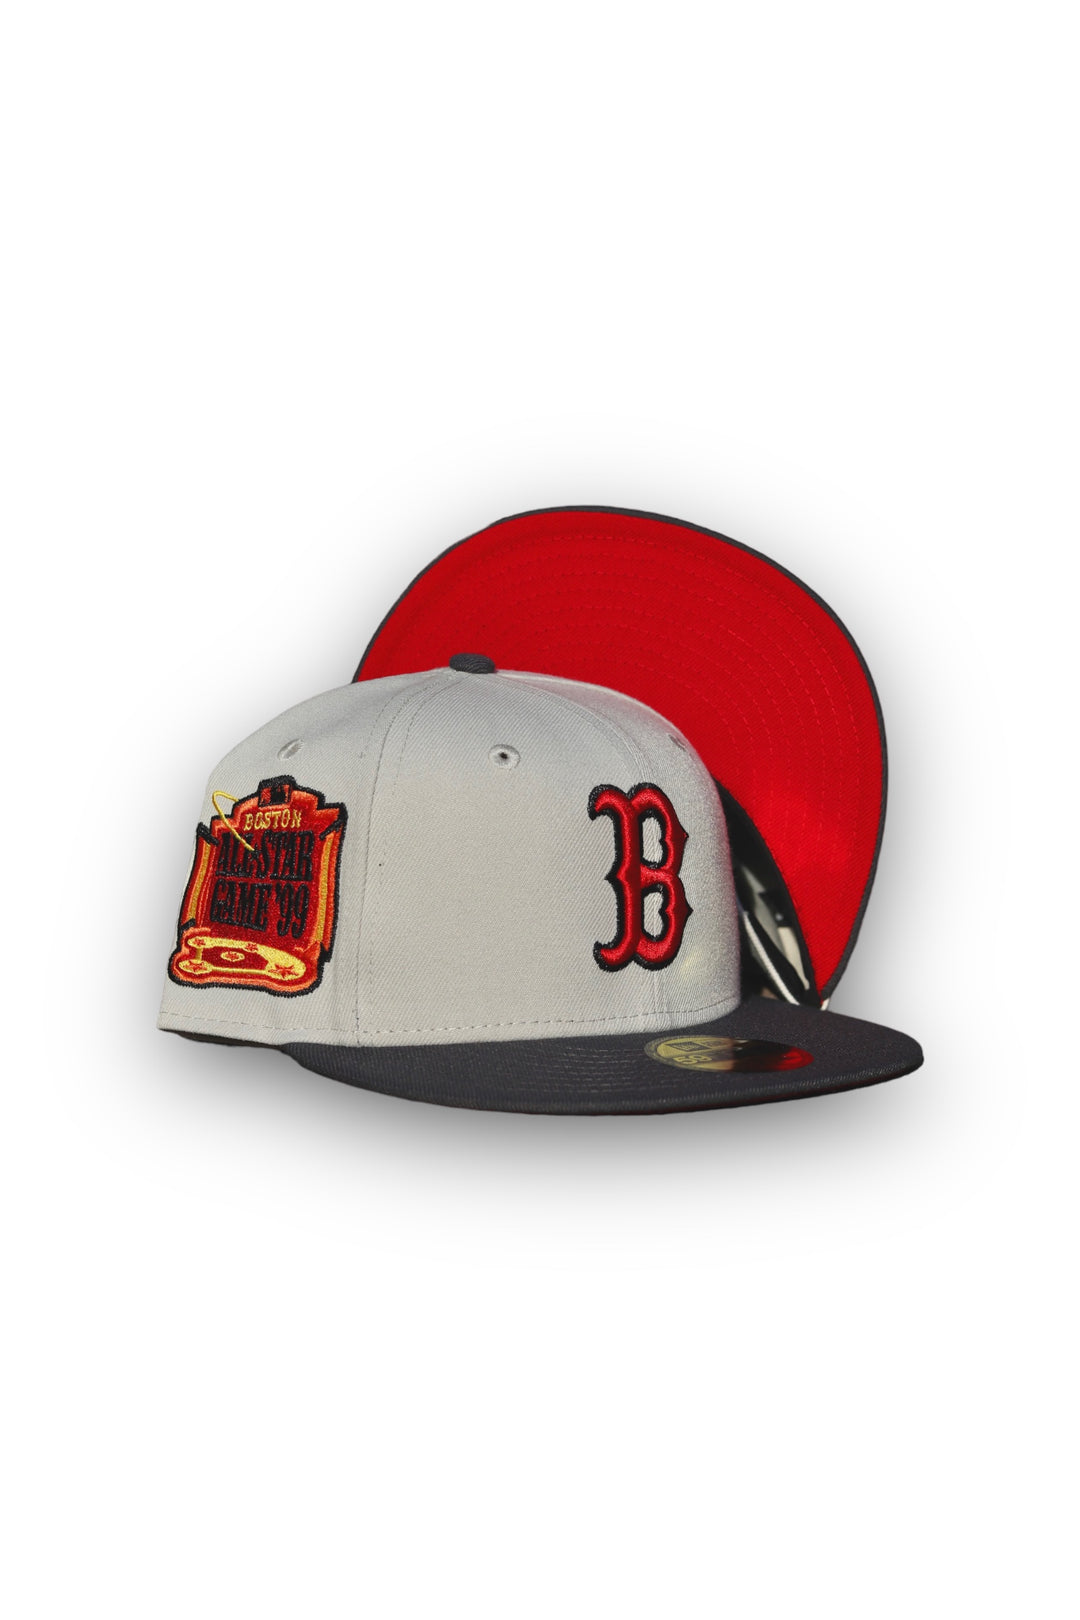 Boston Red Sox '99 ASG “Fire Pit”